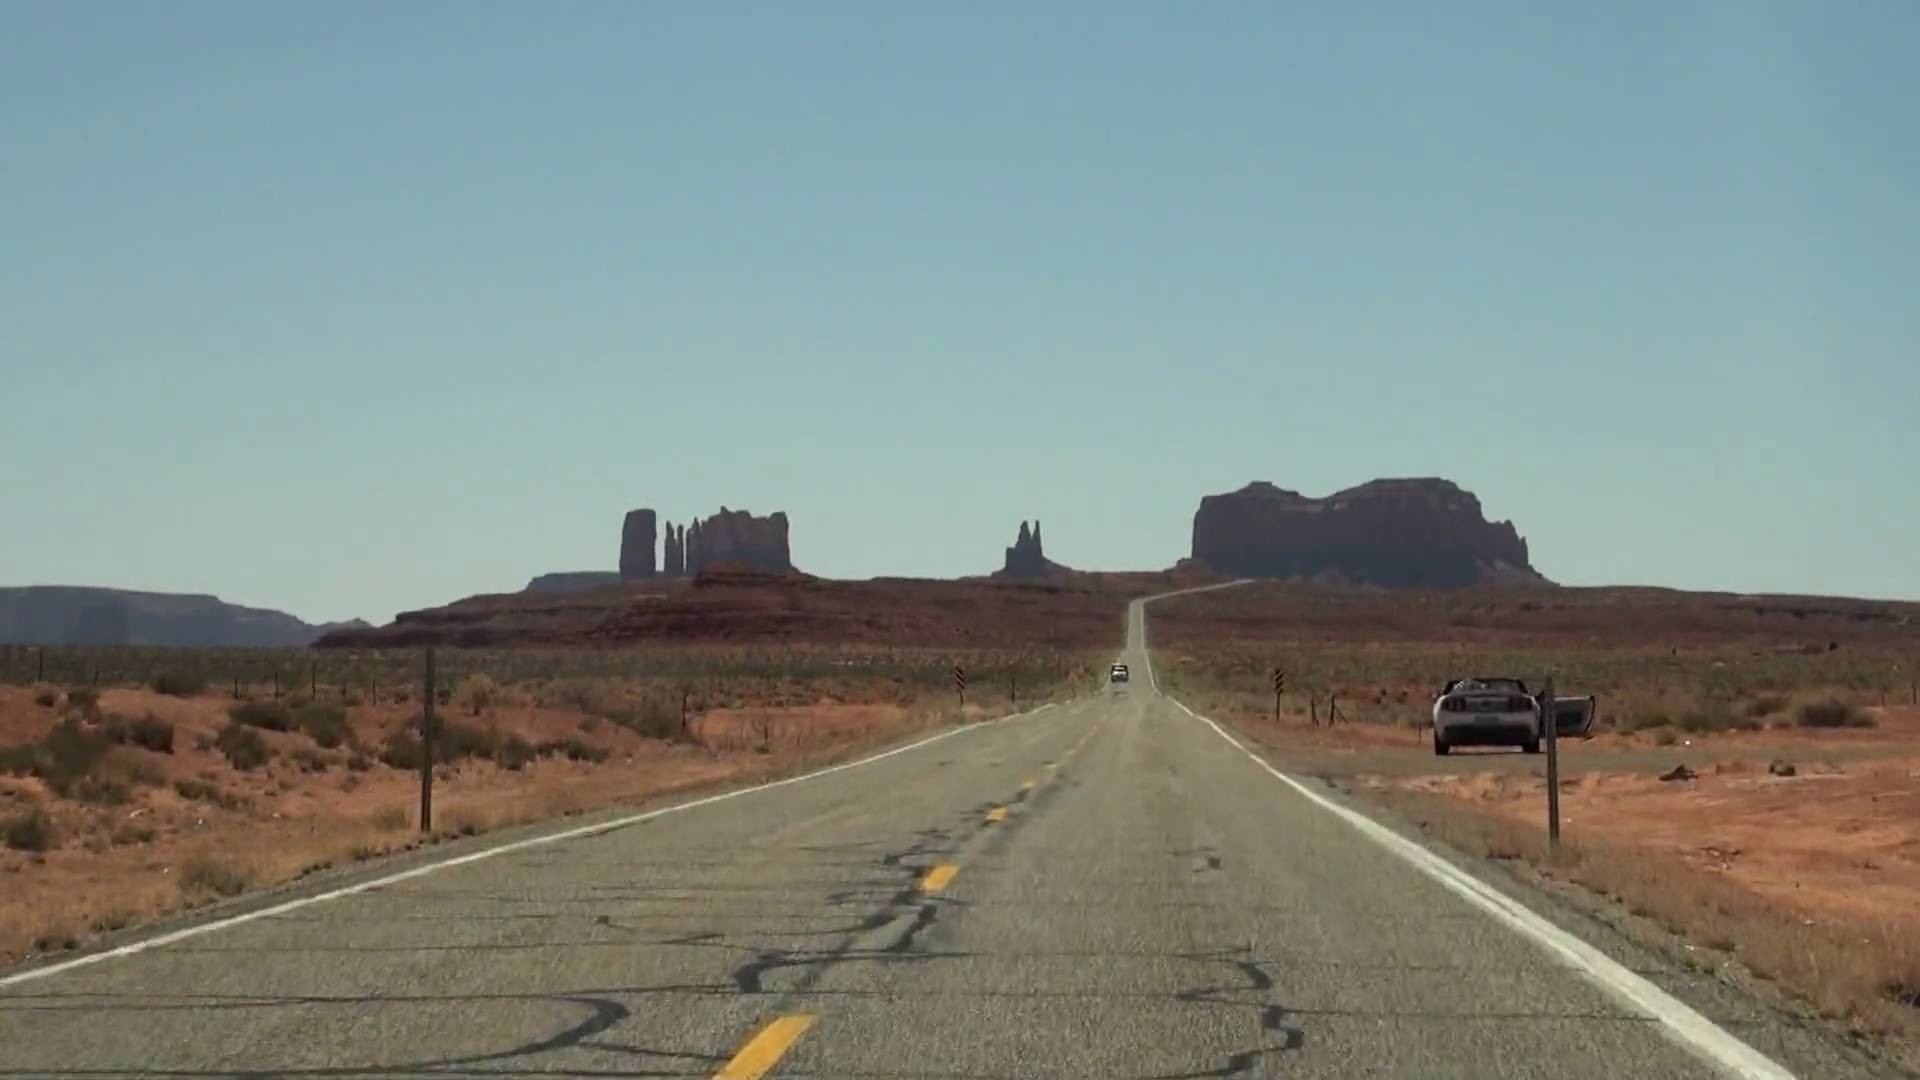 1920x1080 "Forrest Gump Point" - Heading to Monument Valley, US-163